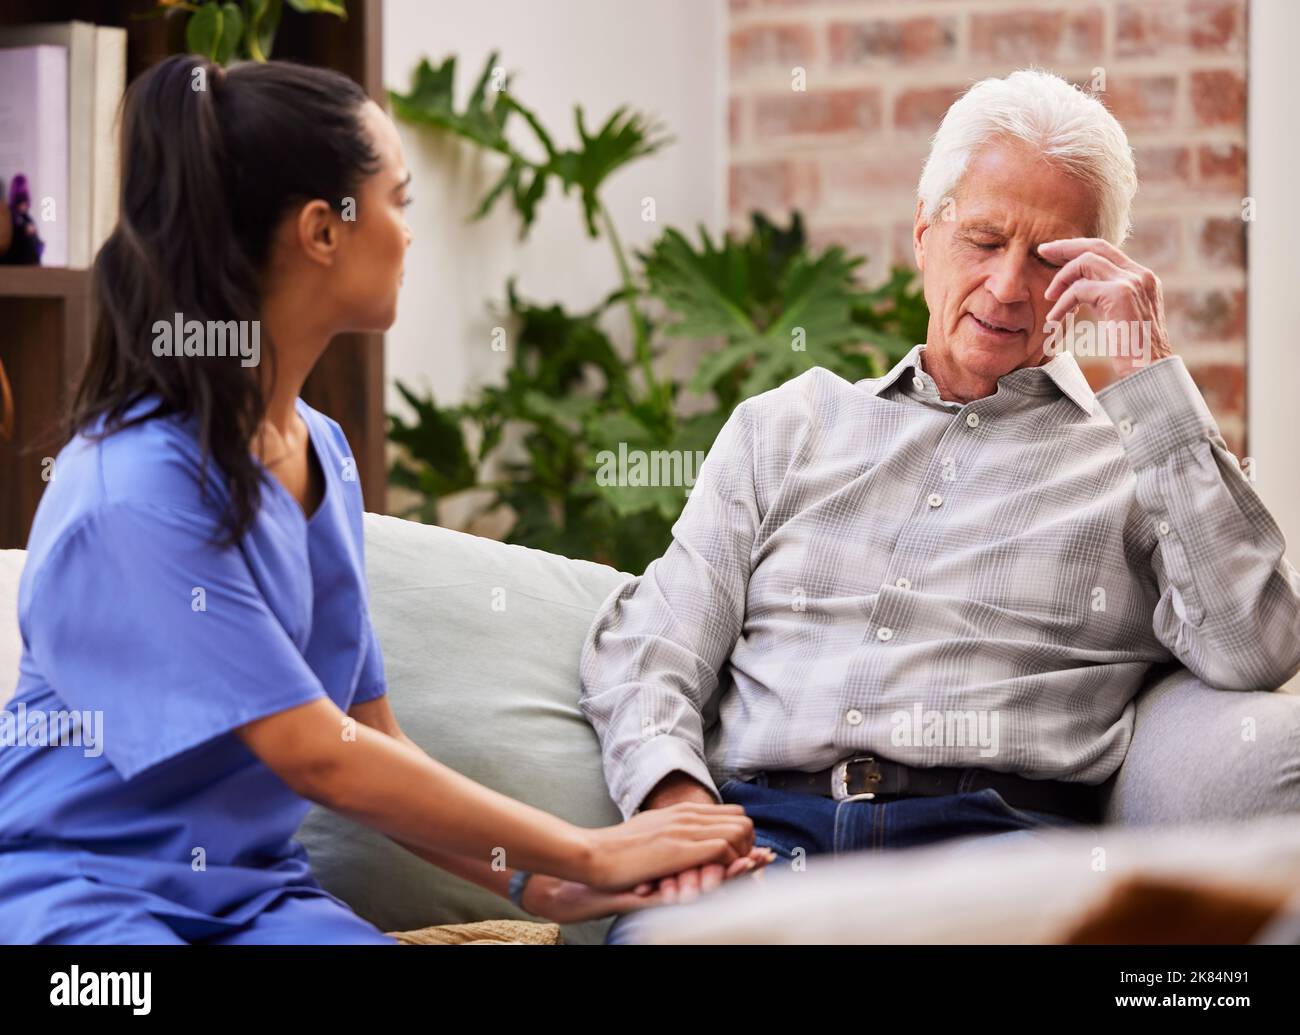 Its been such a heavy day. a young female nurse giving her elderly patient support. Stock Photo